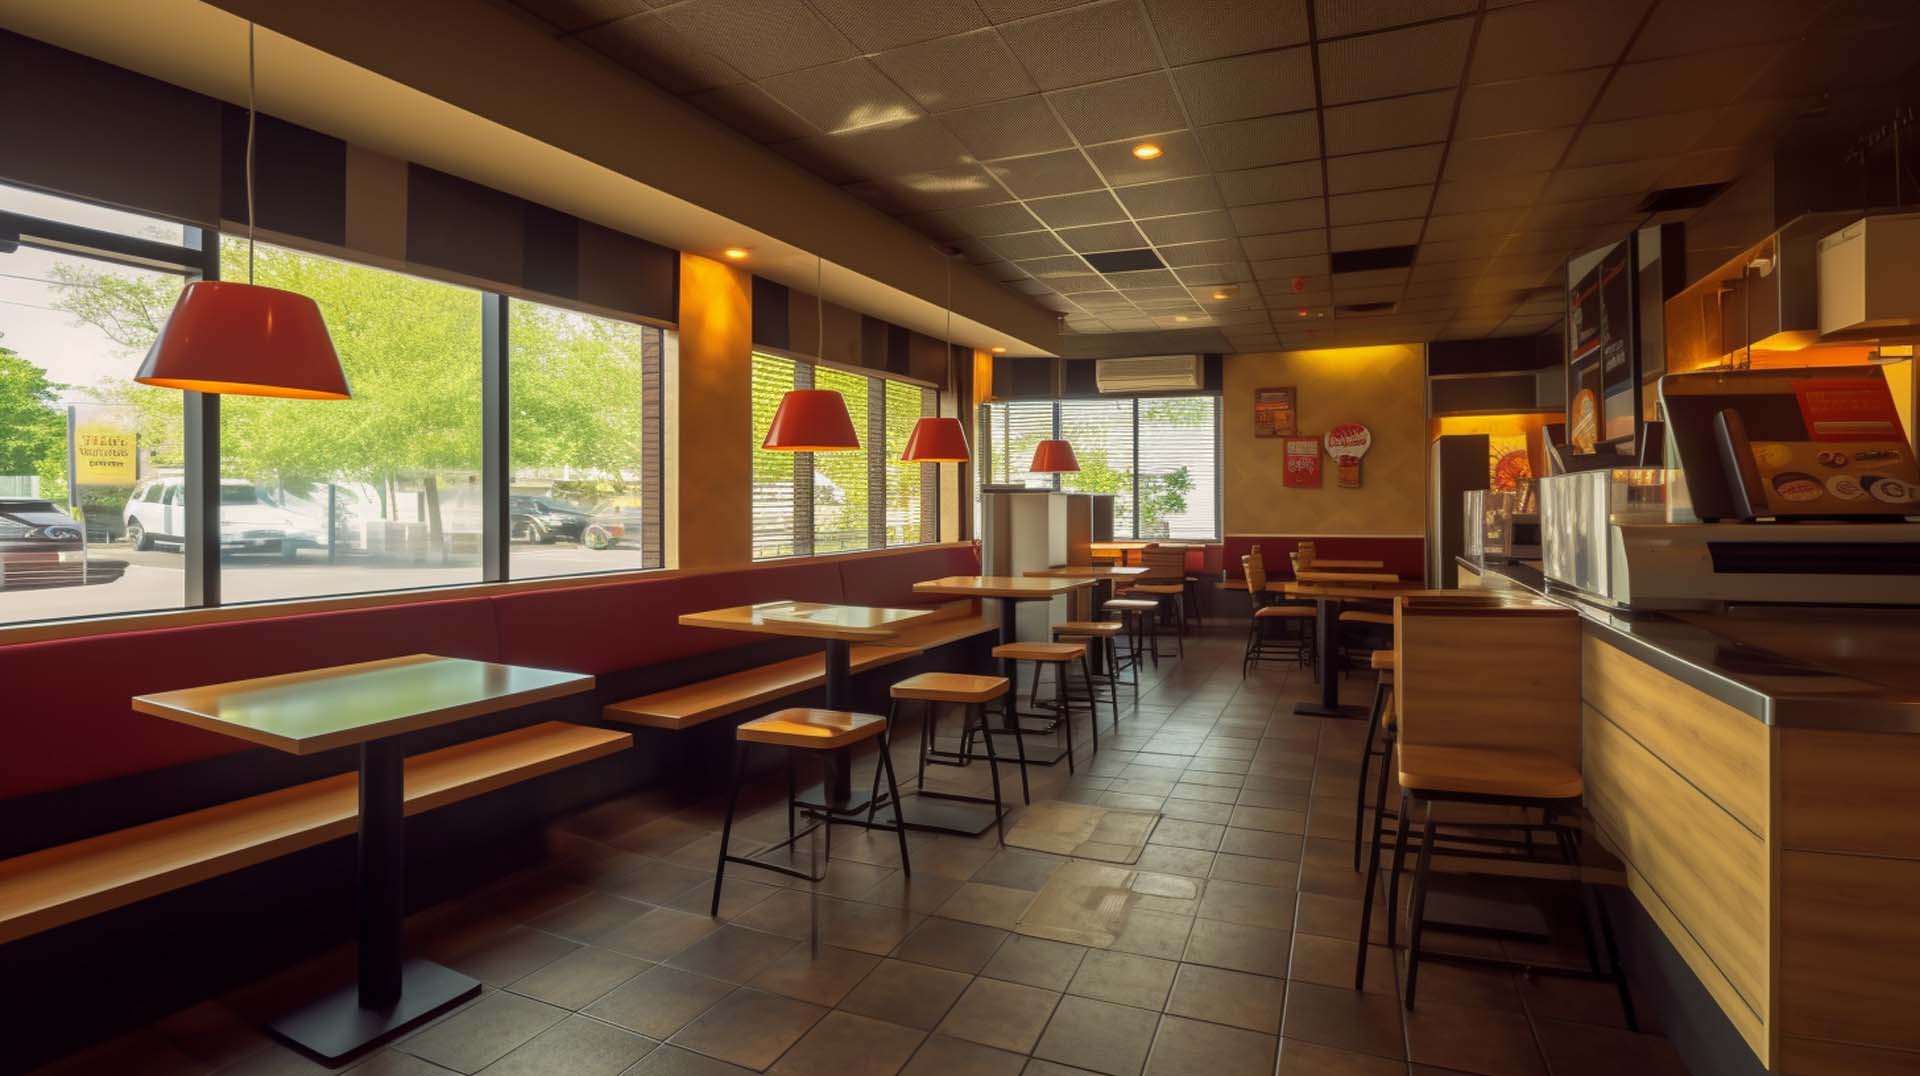 Best Fast Food Chains in Danville